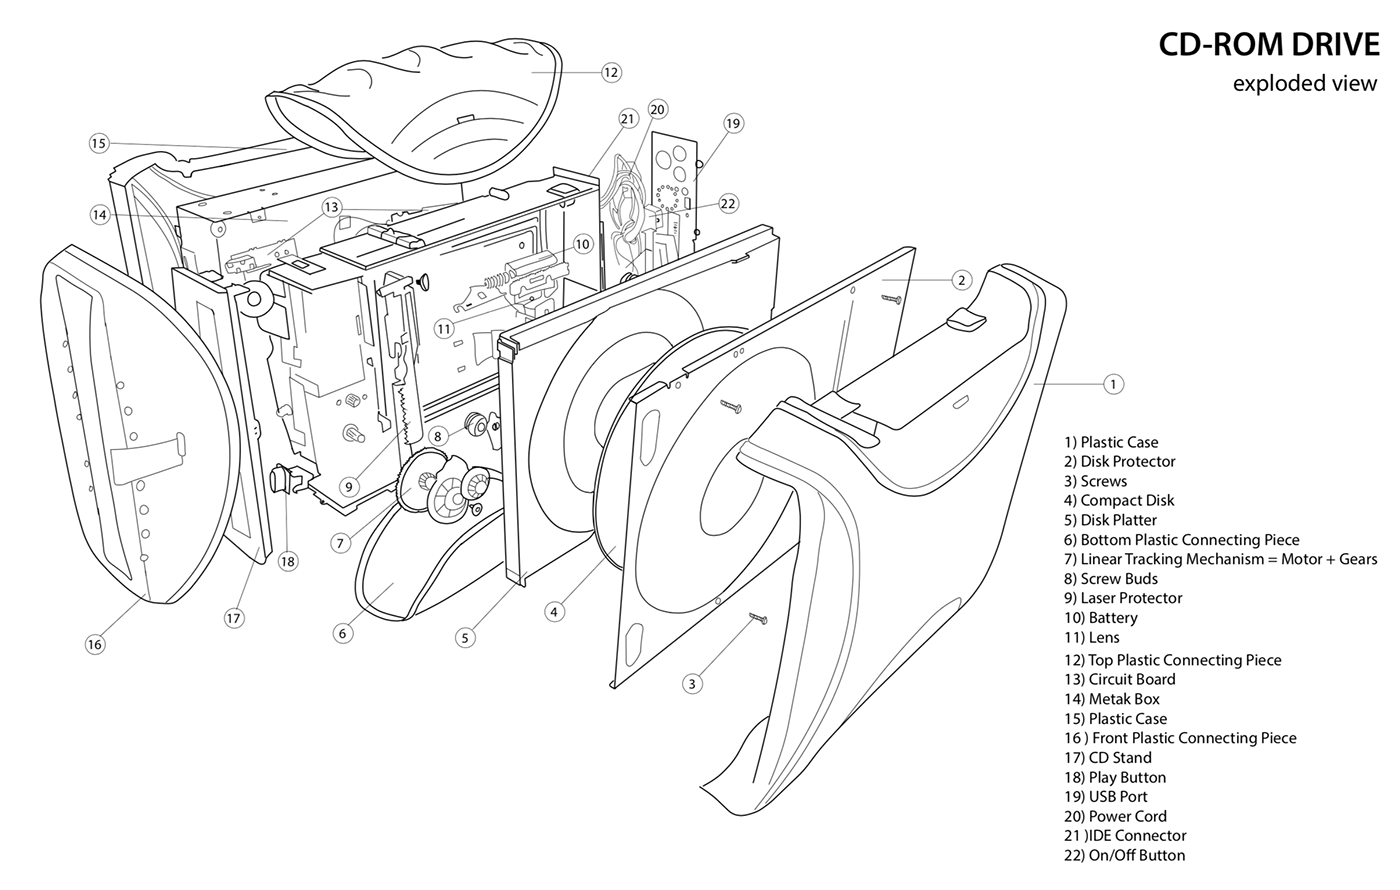 Exploded view drawing of gearbox 1 Case 2 Shaft 3 Gear 4   Download Scientific Diagram